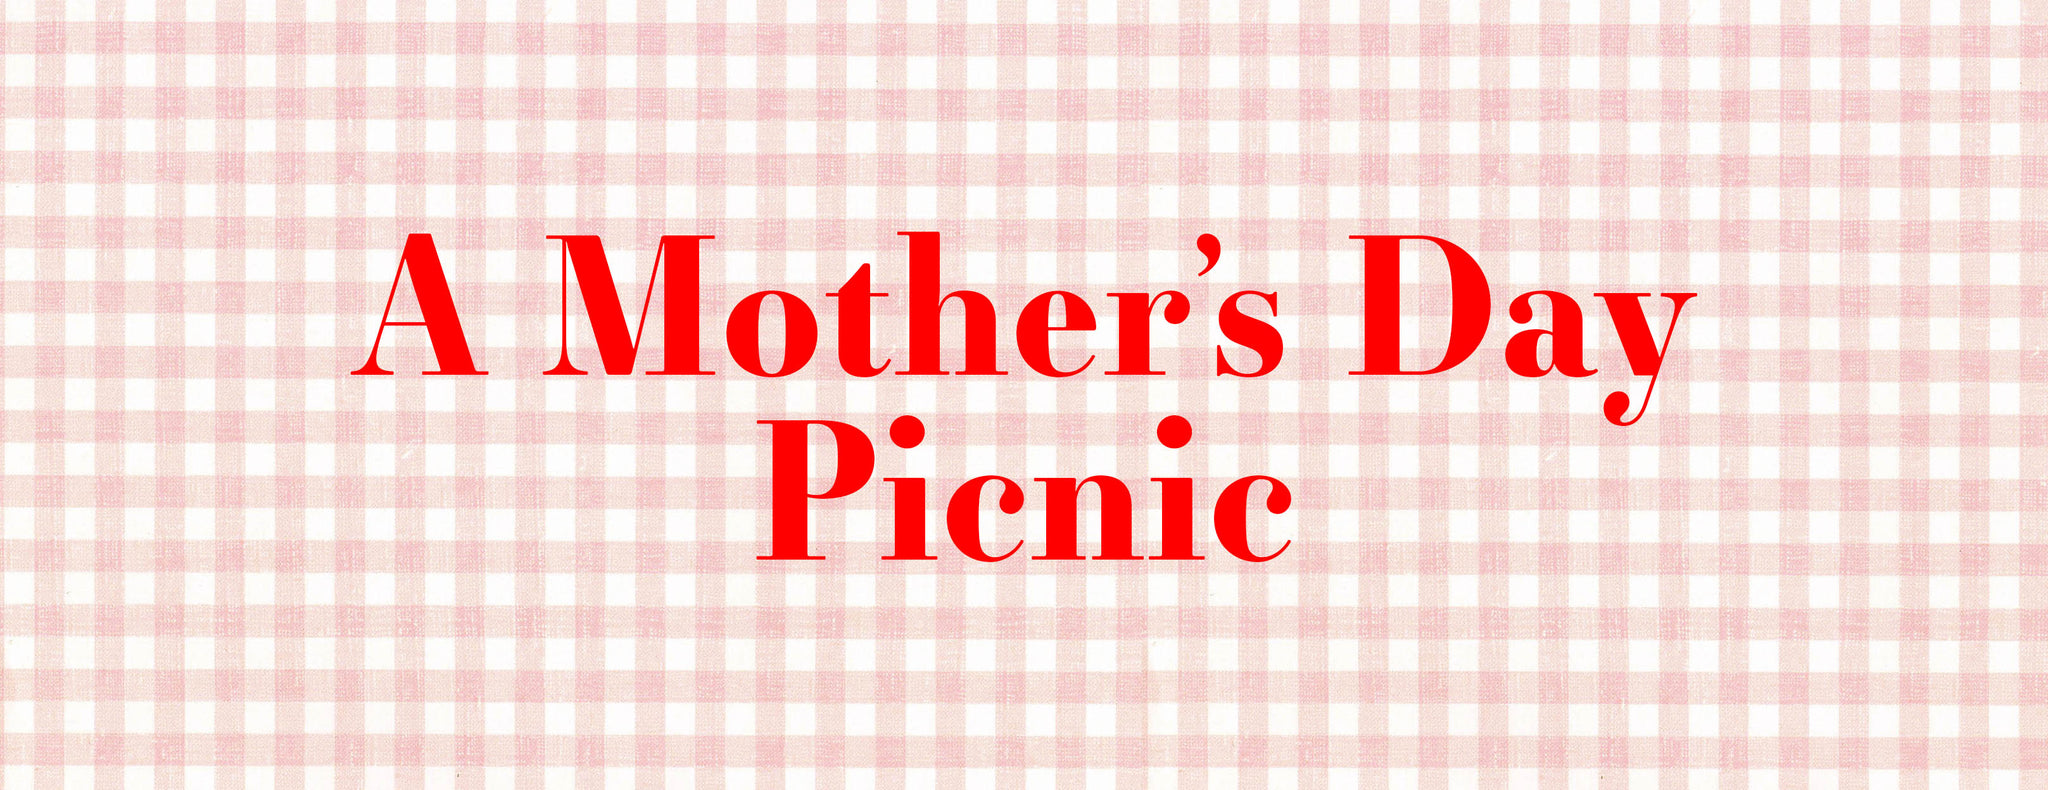 PARTY ET CIE EVENTS - A MOTHER'S DAY PICNIC